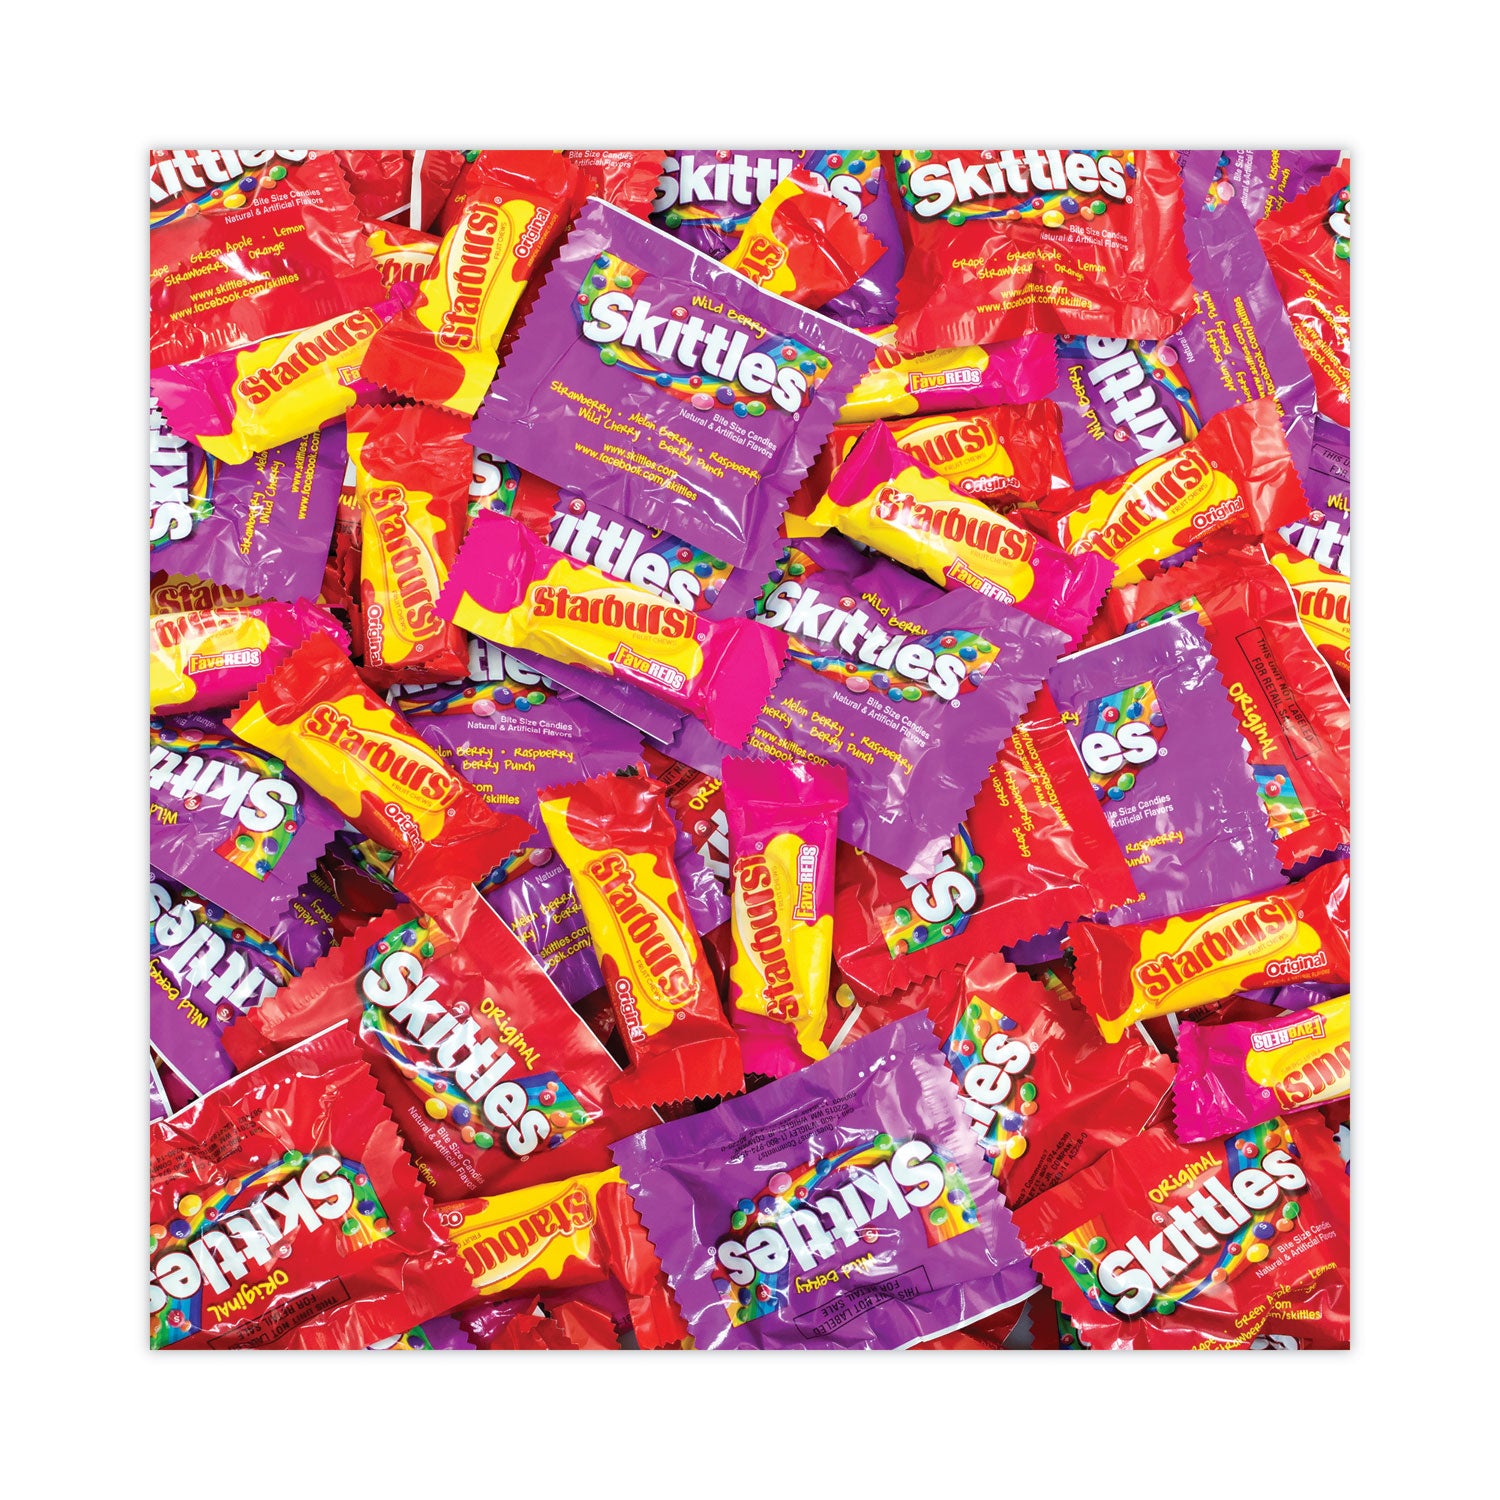 skittles-and-starburst-fun-size-variety-pack-6-lb-84-oz-bag-ships-in-1-3-business-days_grr22000768 - 2